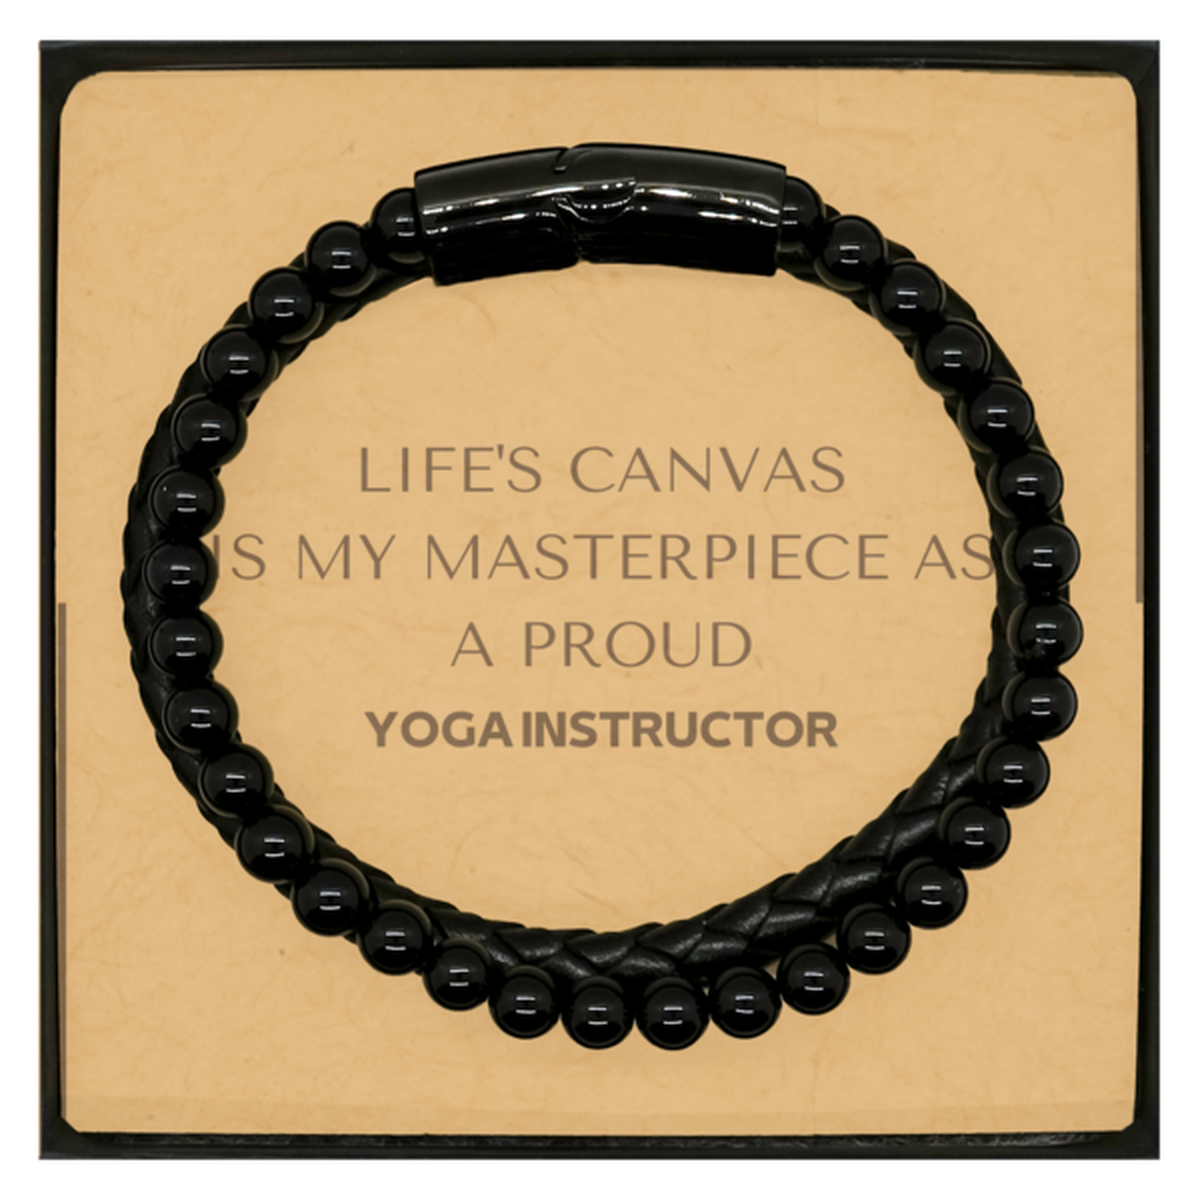 Proud Yoga Instructor Gifts, Life's canvas is my masterpiece, Epic Birthday Christmas Unique Stone Leather Bracelets For Yoga Instructor, Coworkers, Men, Women, Friends